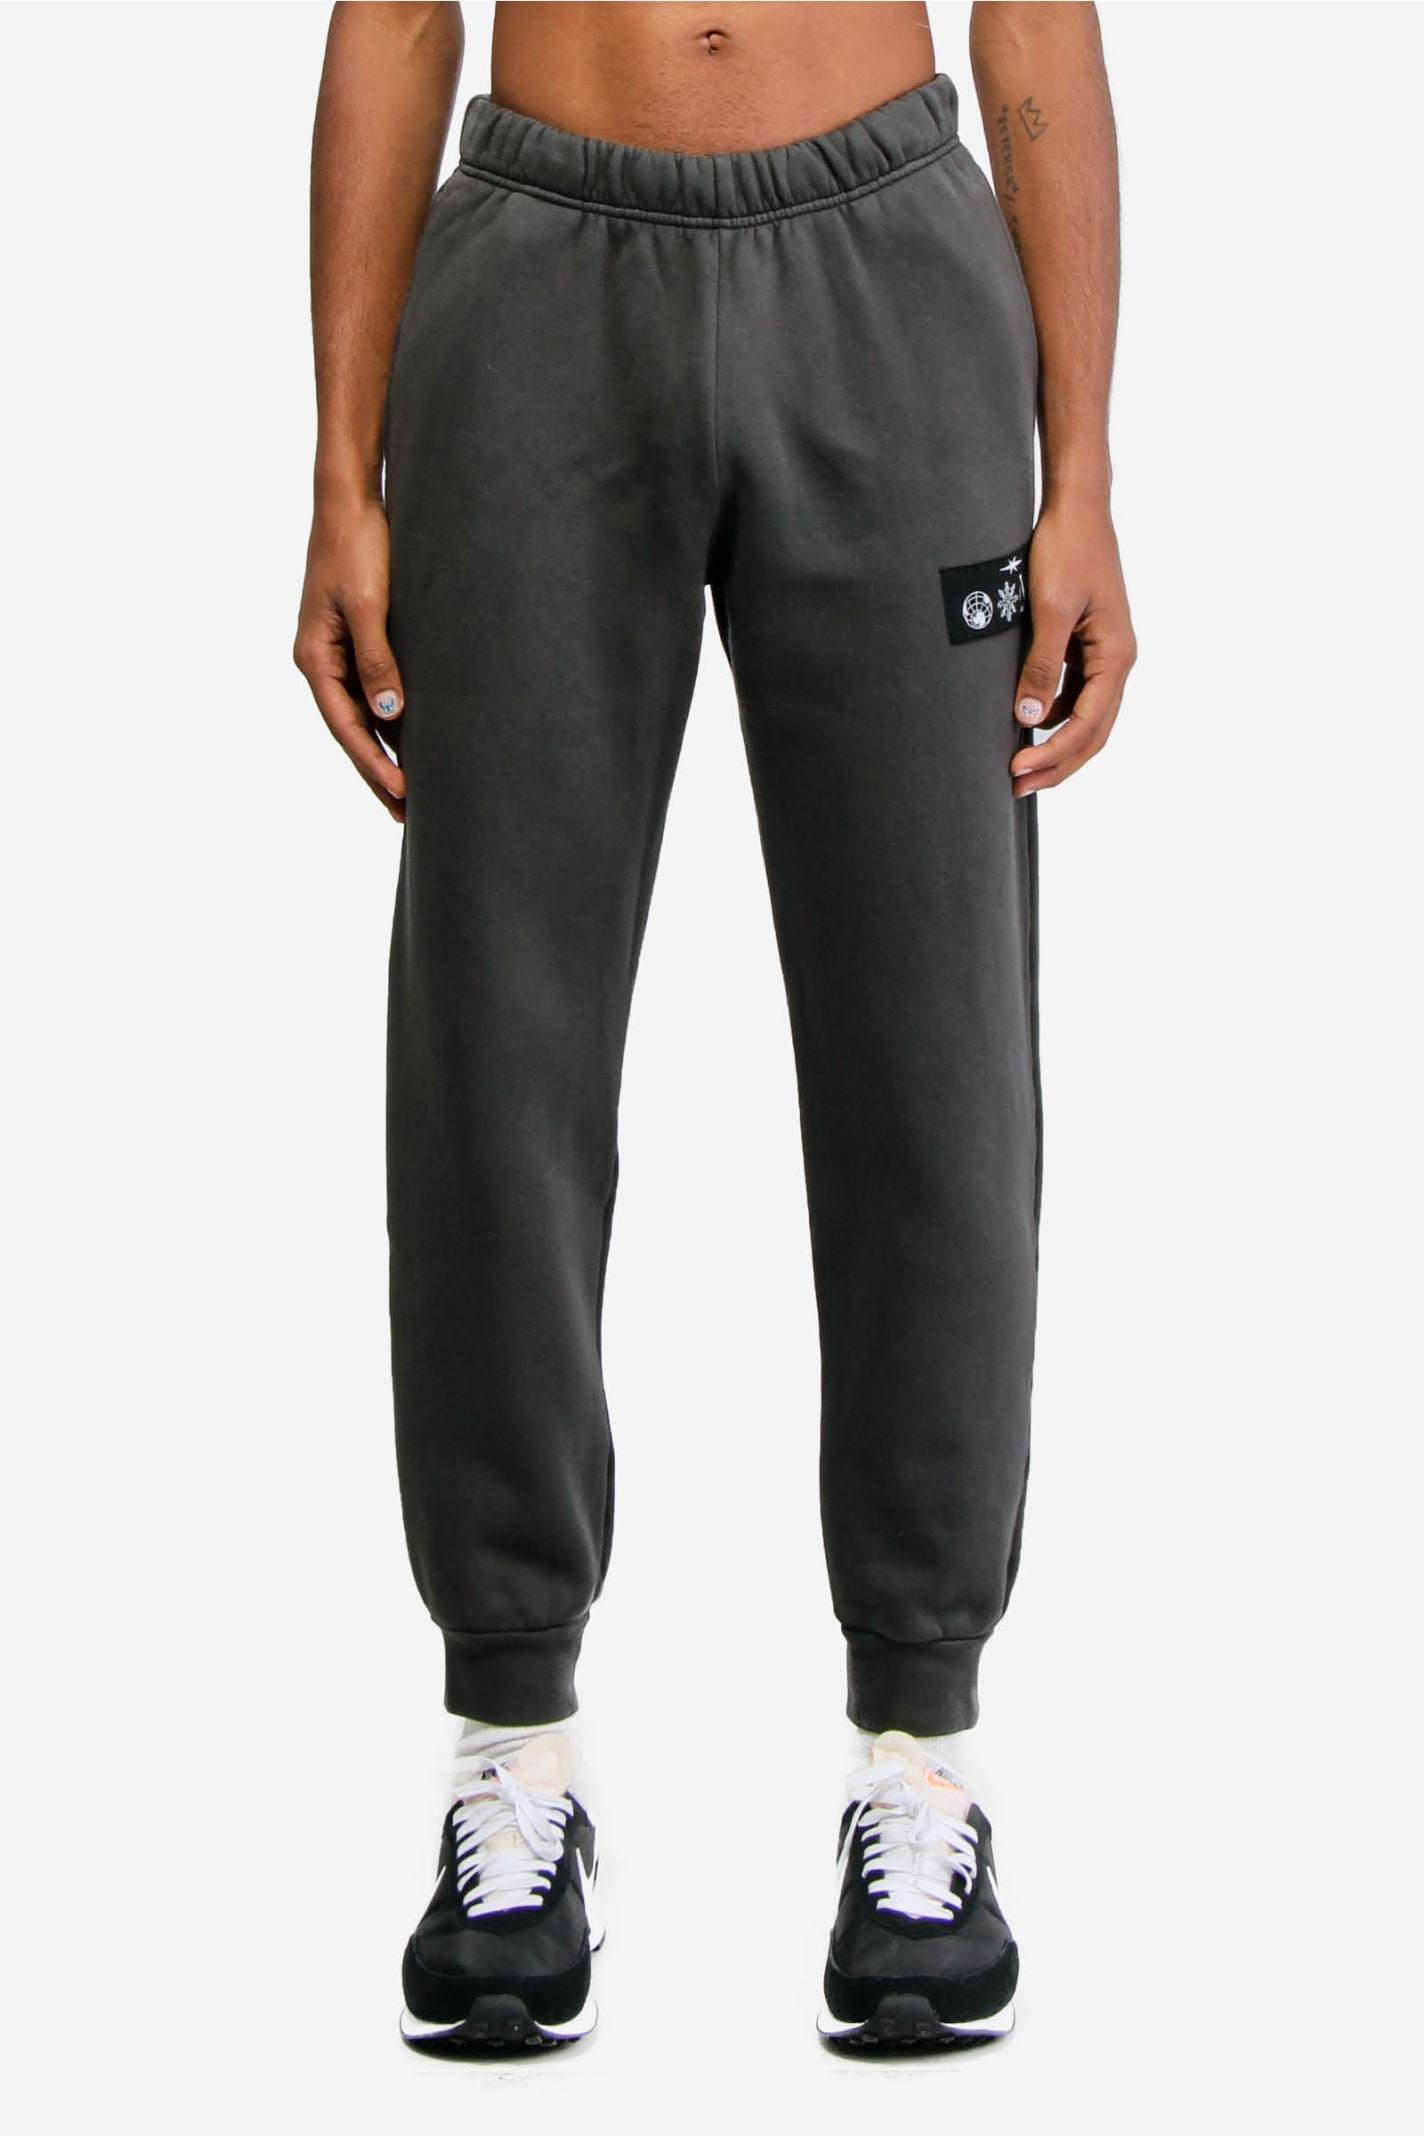 Phipps Essential Pants